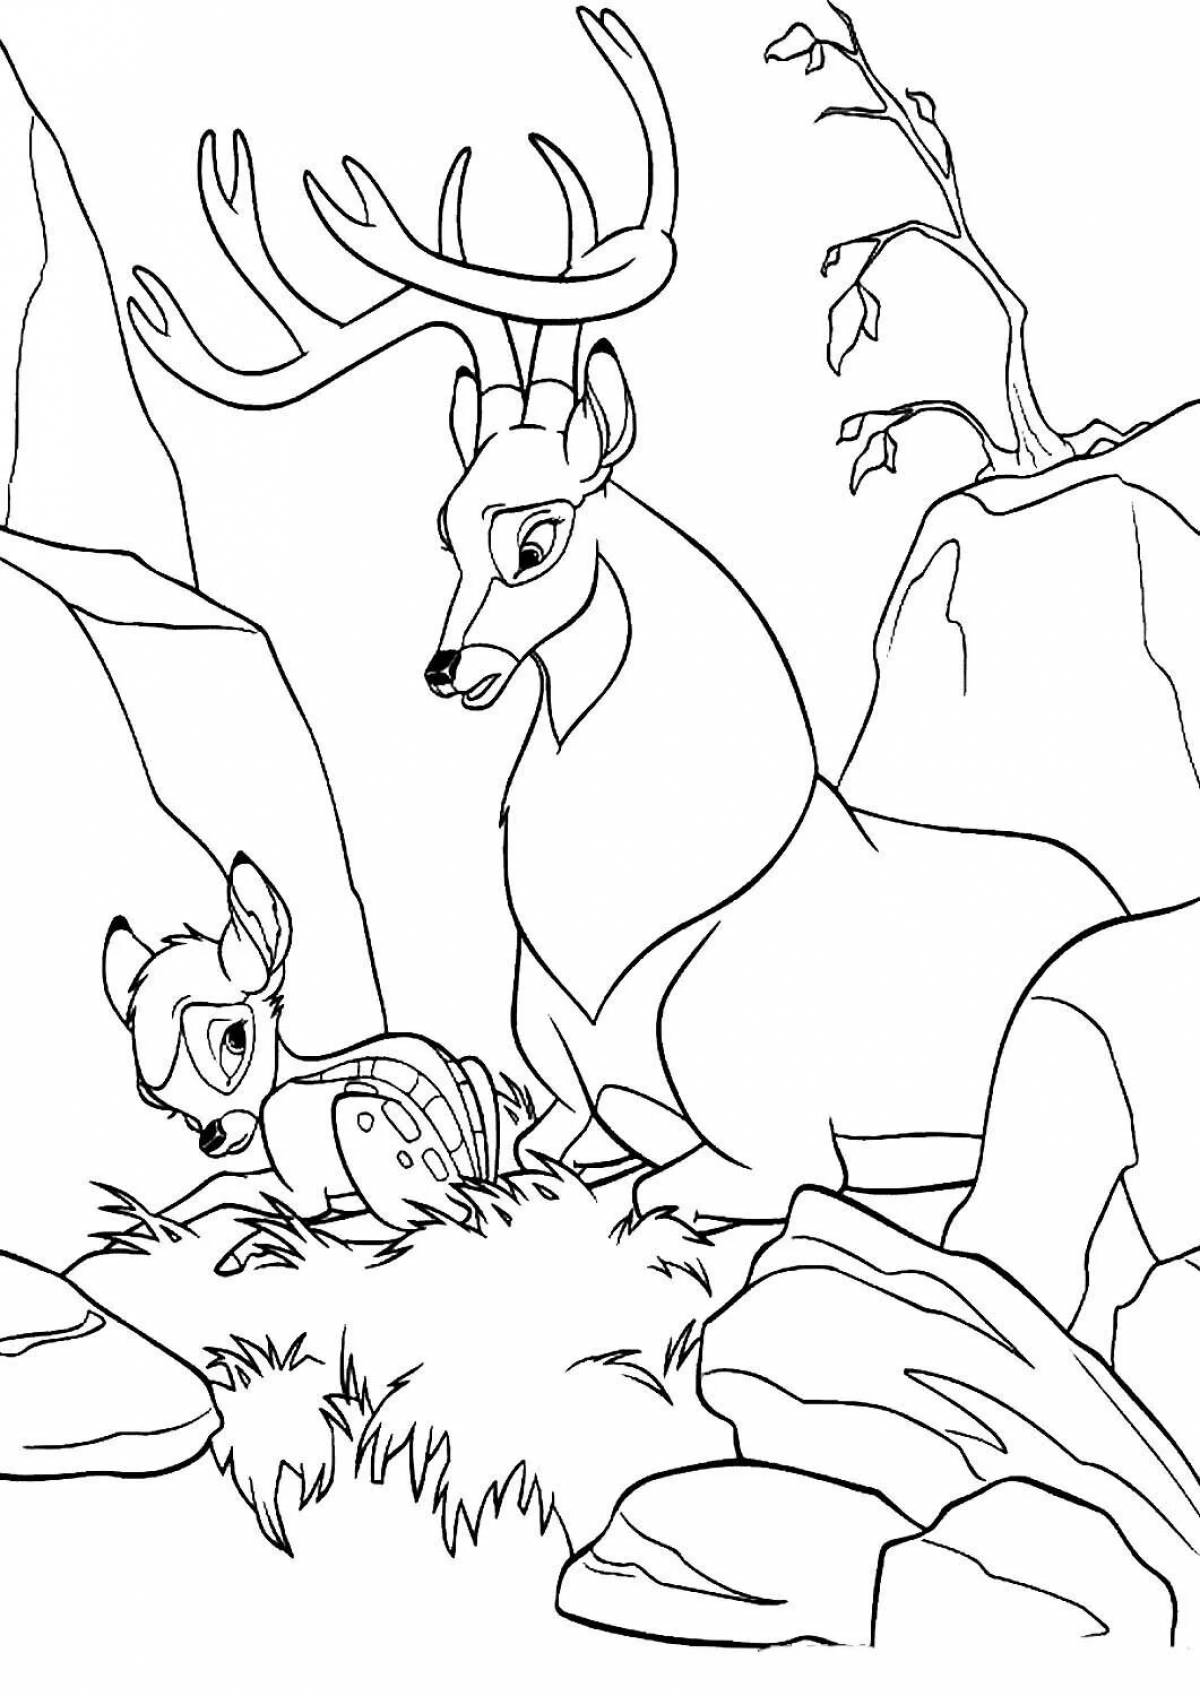 Exquisite bambi coloring 2